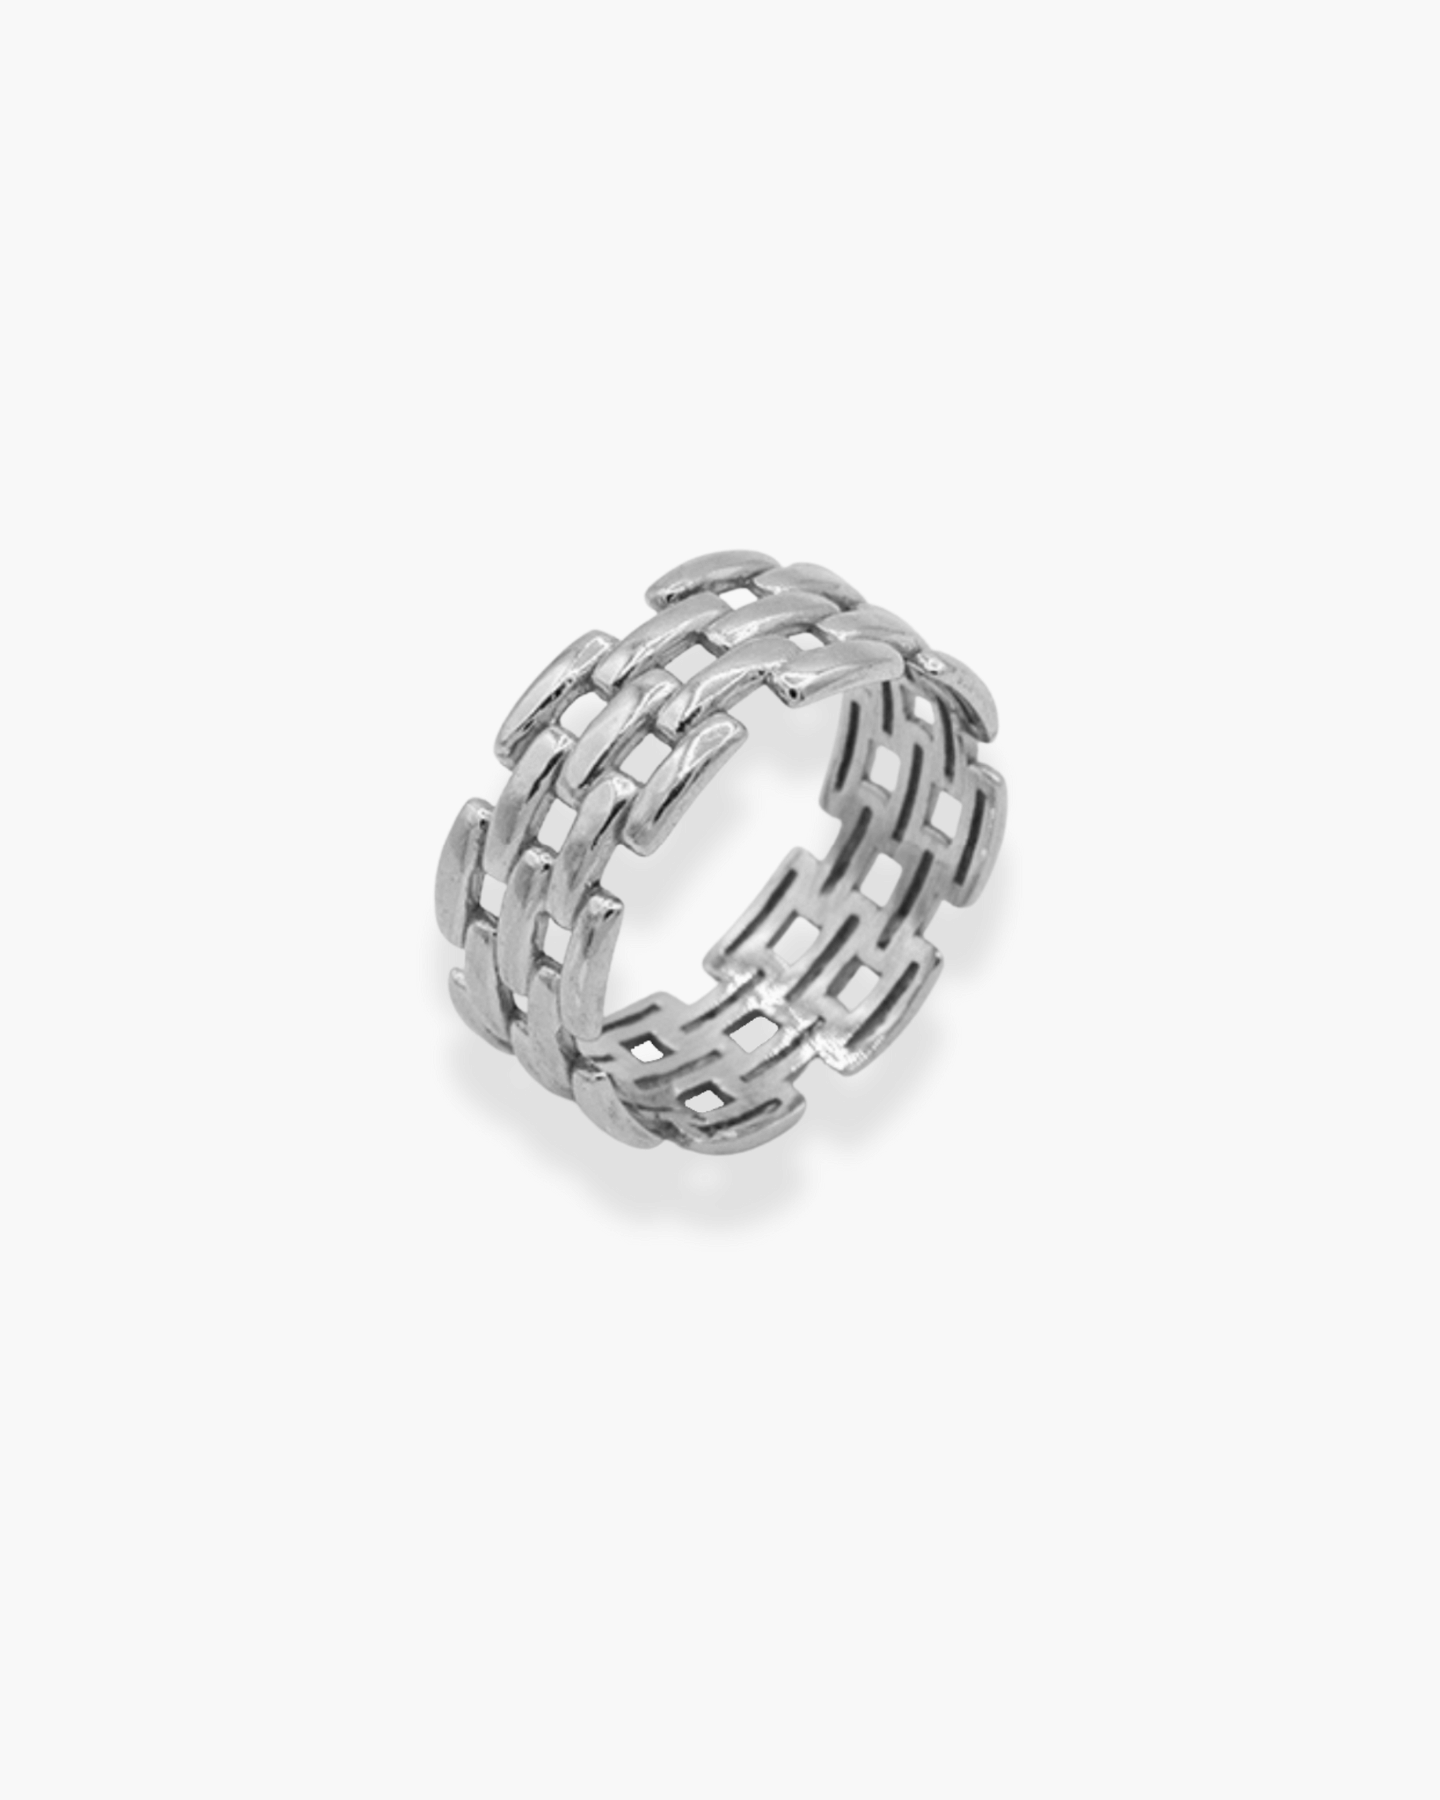 Linked Souls Ring Silver